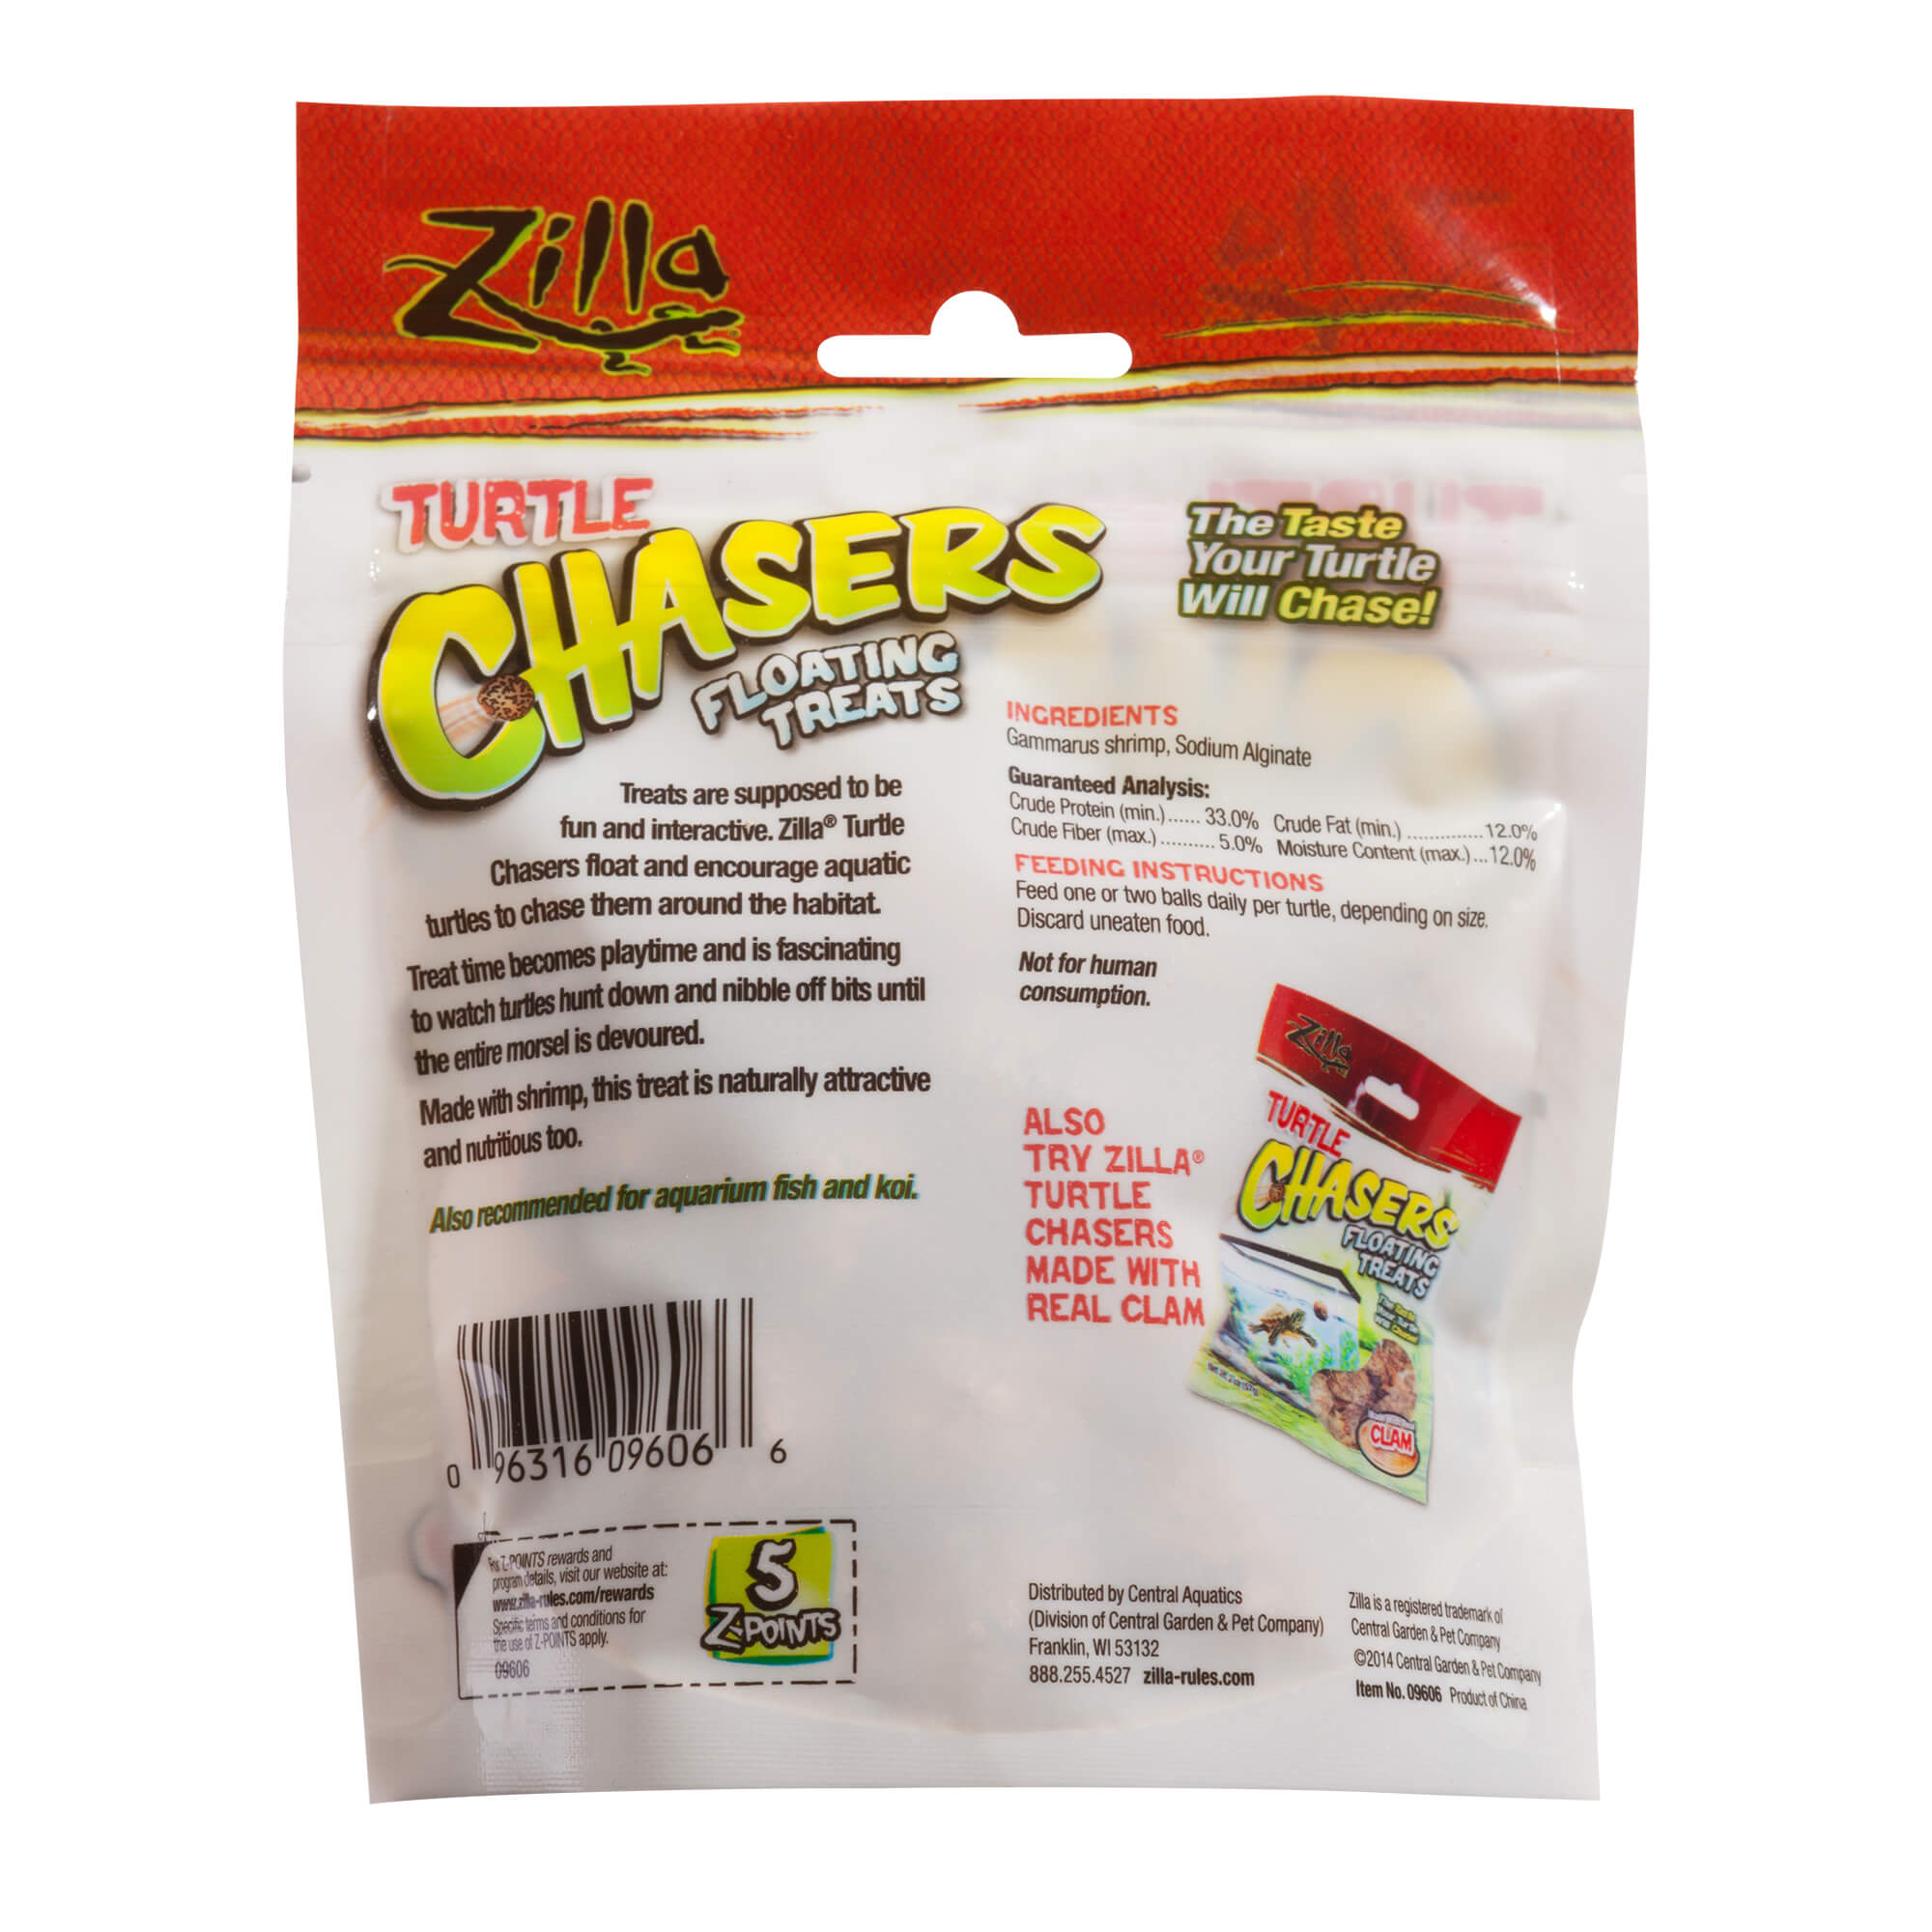 Zilla Turtle Chasers Floating Treats Ingredients List